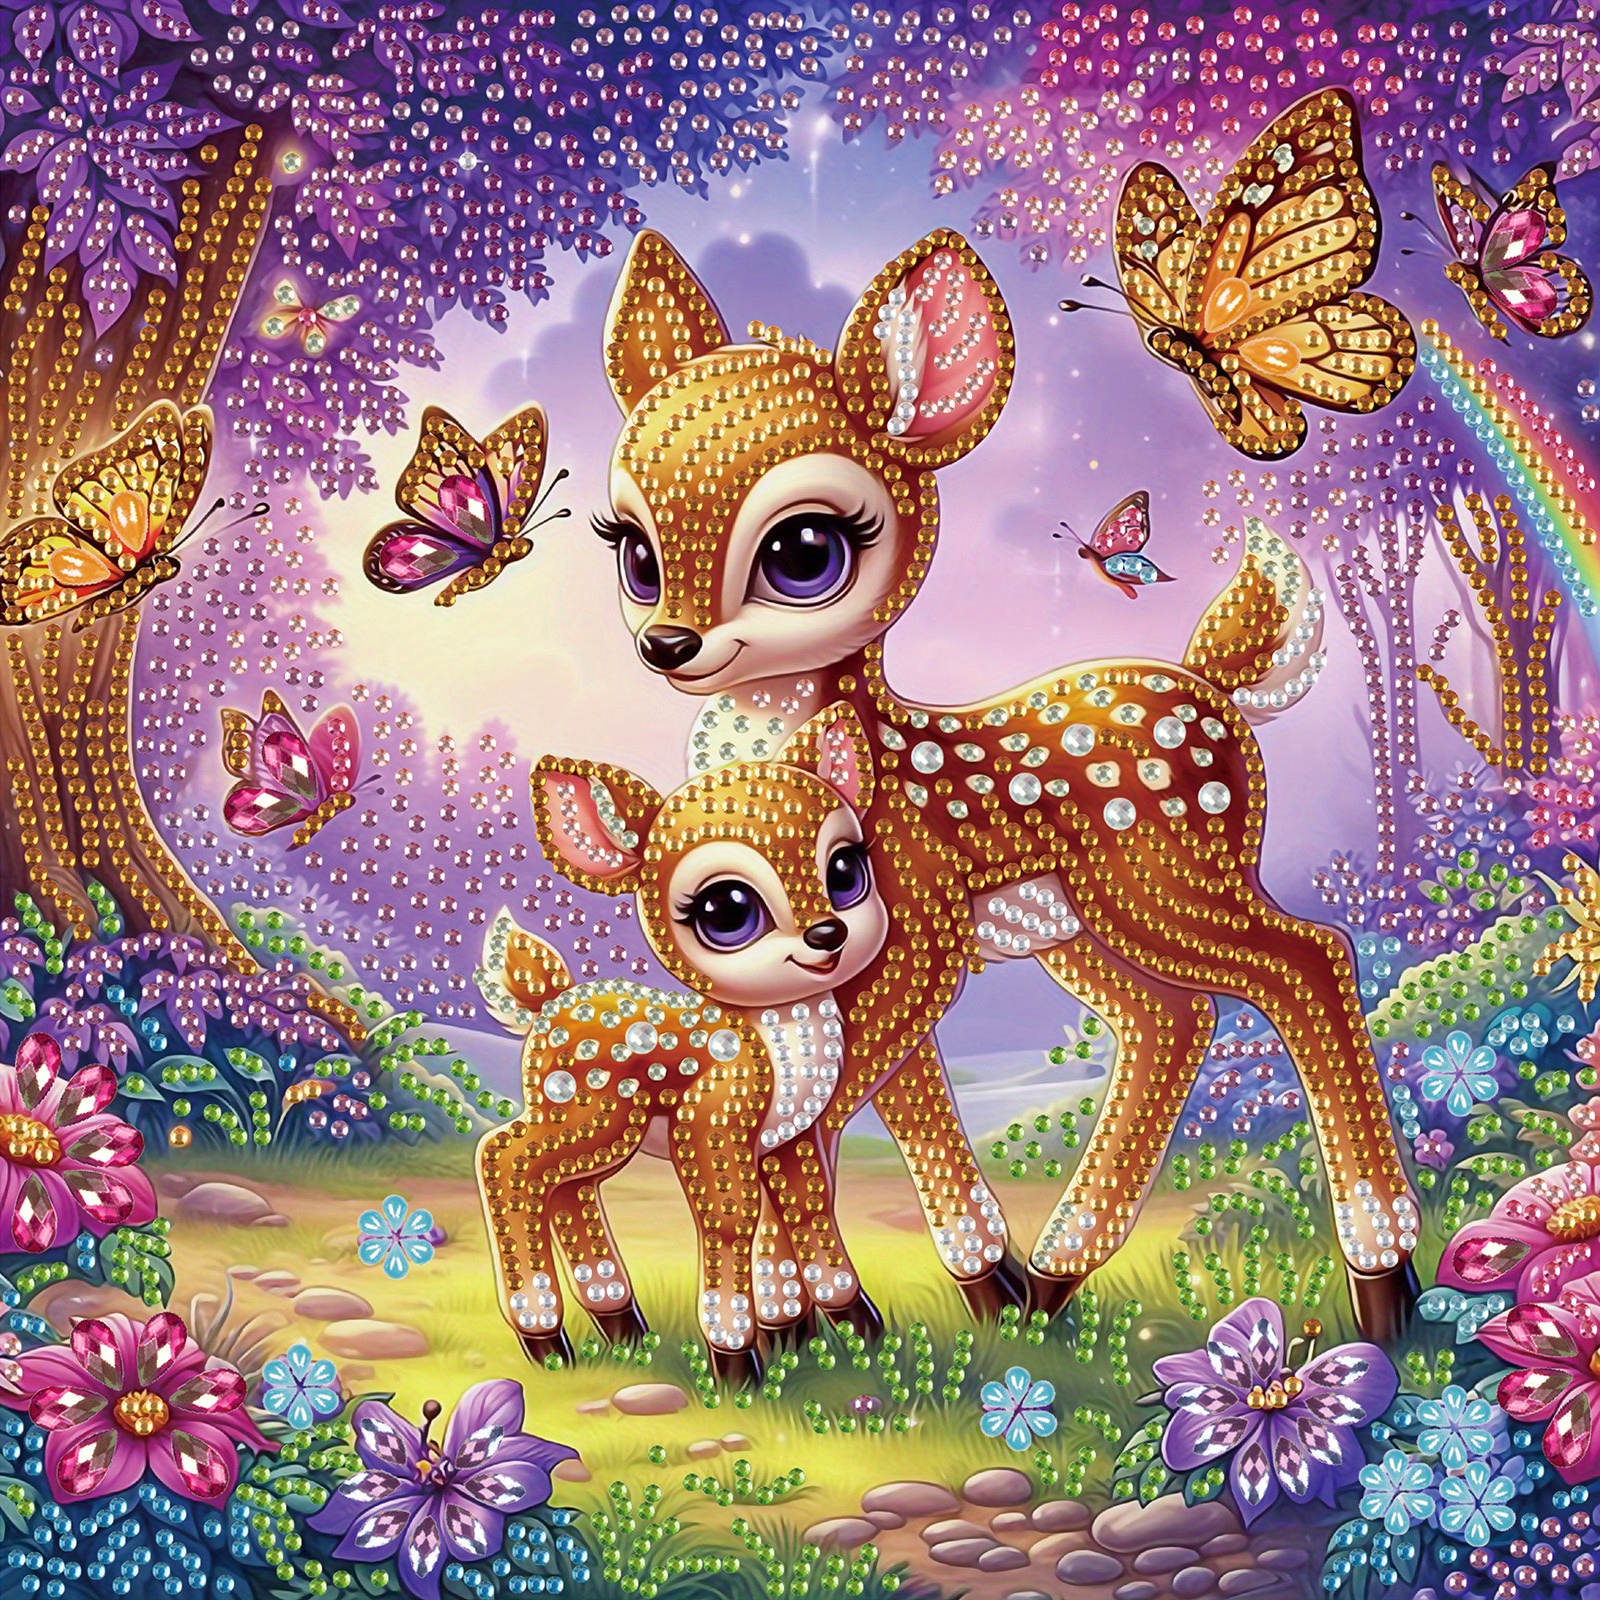 

5d Fawn & Butterfly Diamond Painting Kit - Diy Family-themed Craft With Special Shaped Diamonds, Animal Canvas Art Set For Home Wall Decor And Gift